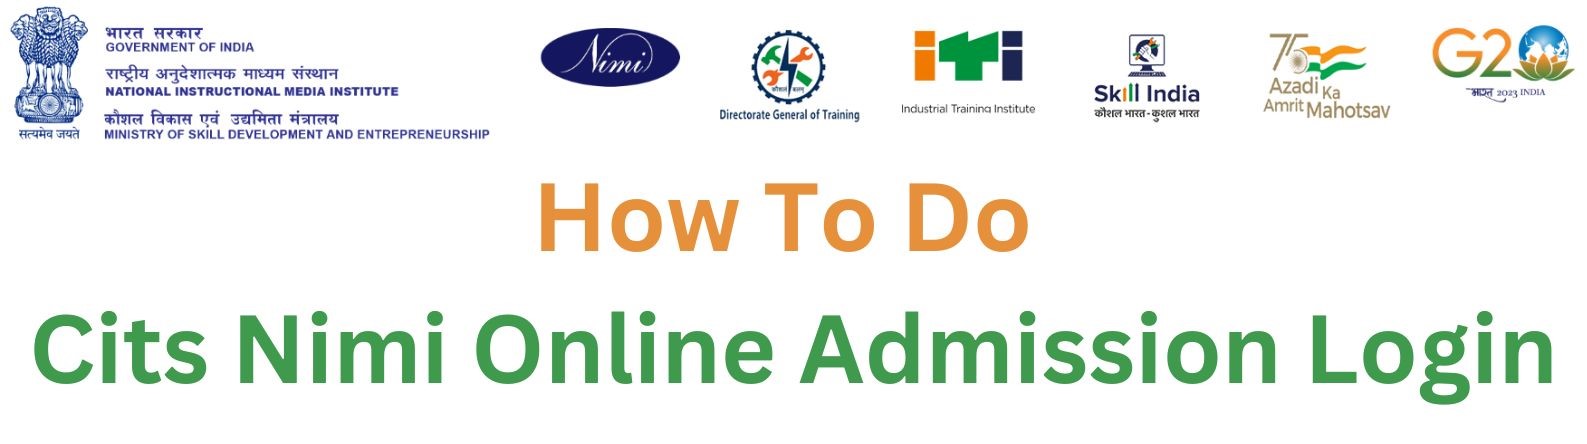 How To Do Cits Nimi Online Admission Login